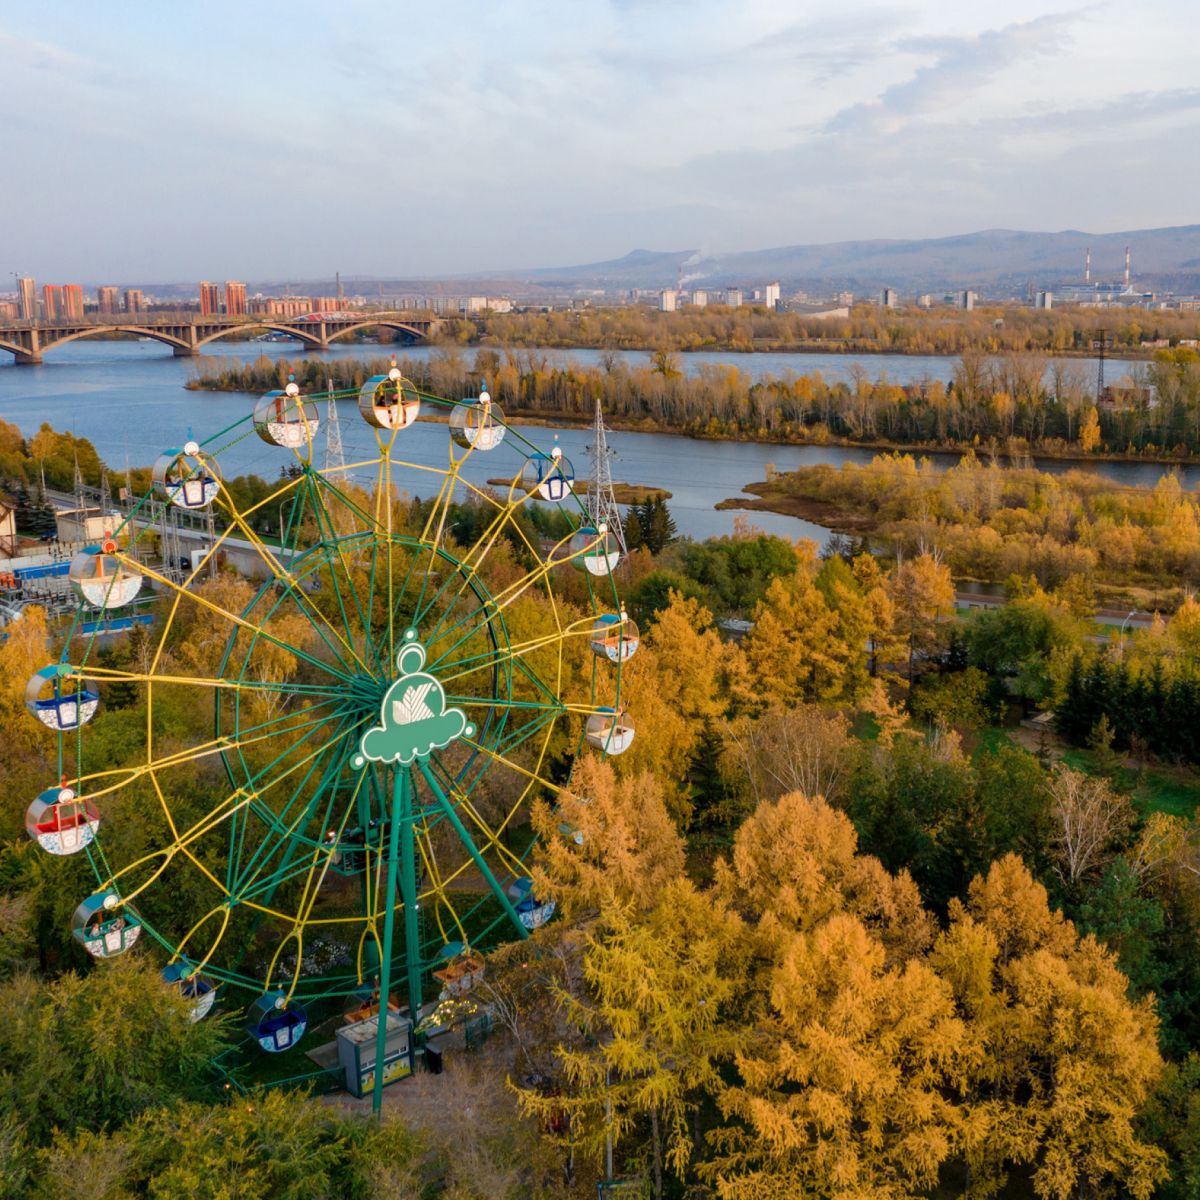 Competitions of the Agency CENTER for public parks in Russia